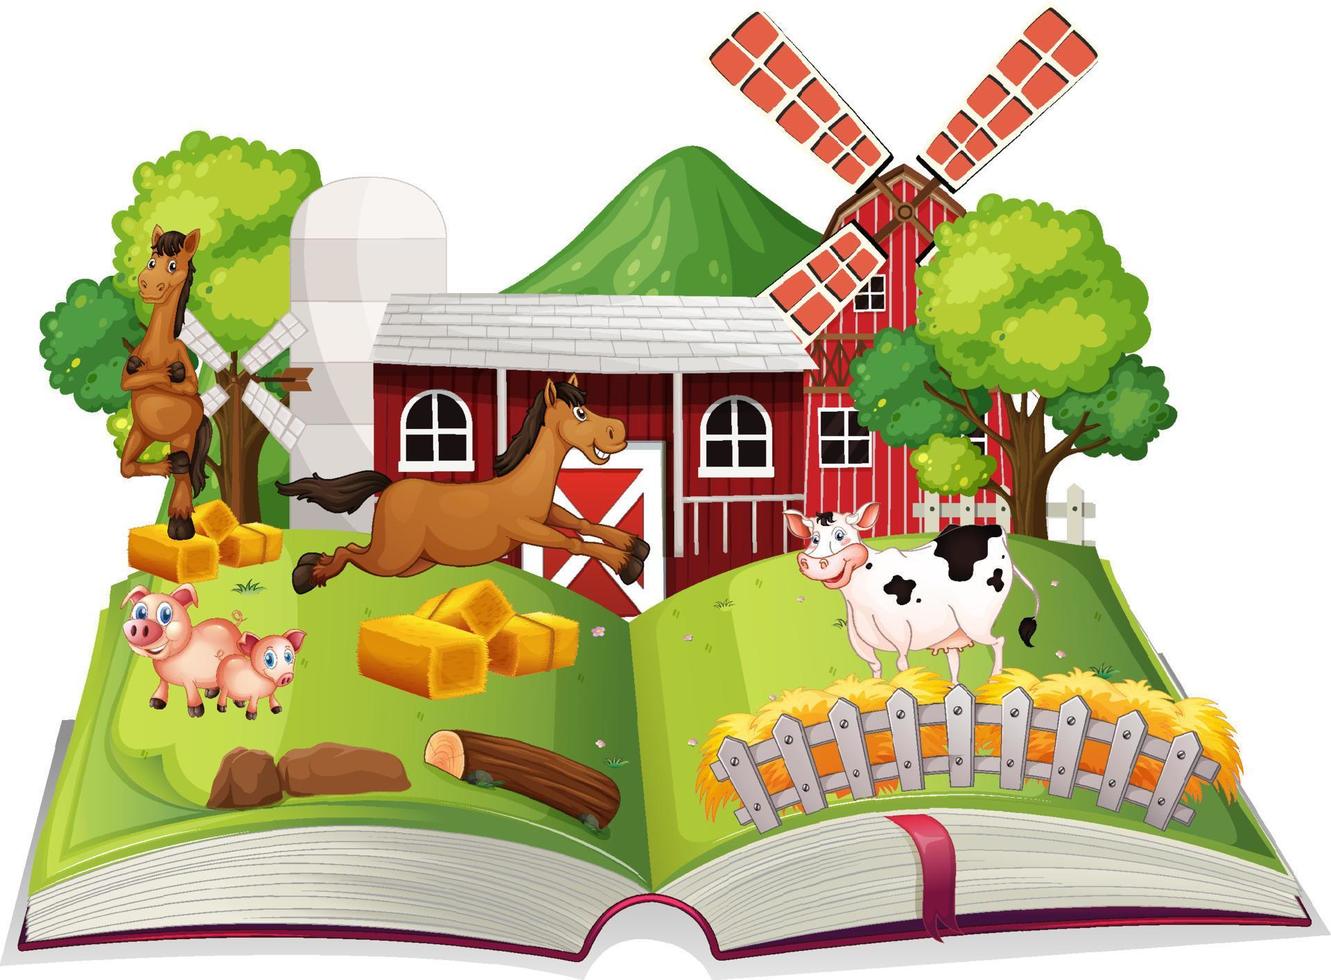 Storybook with farm animals in the farm vector